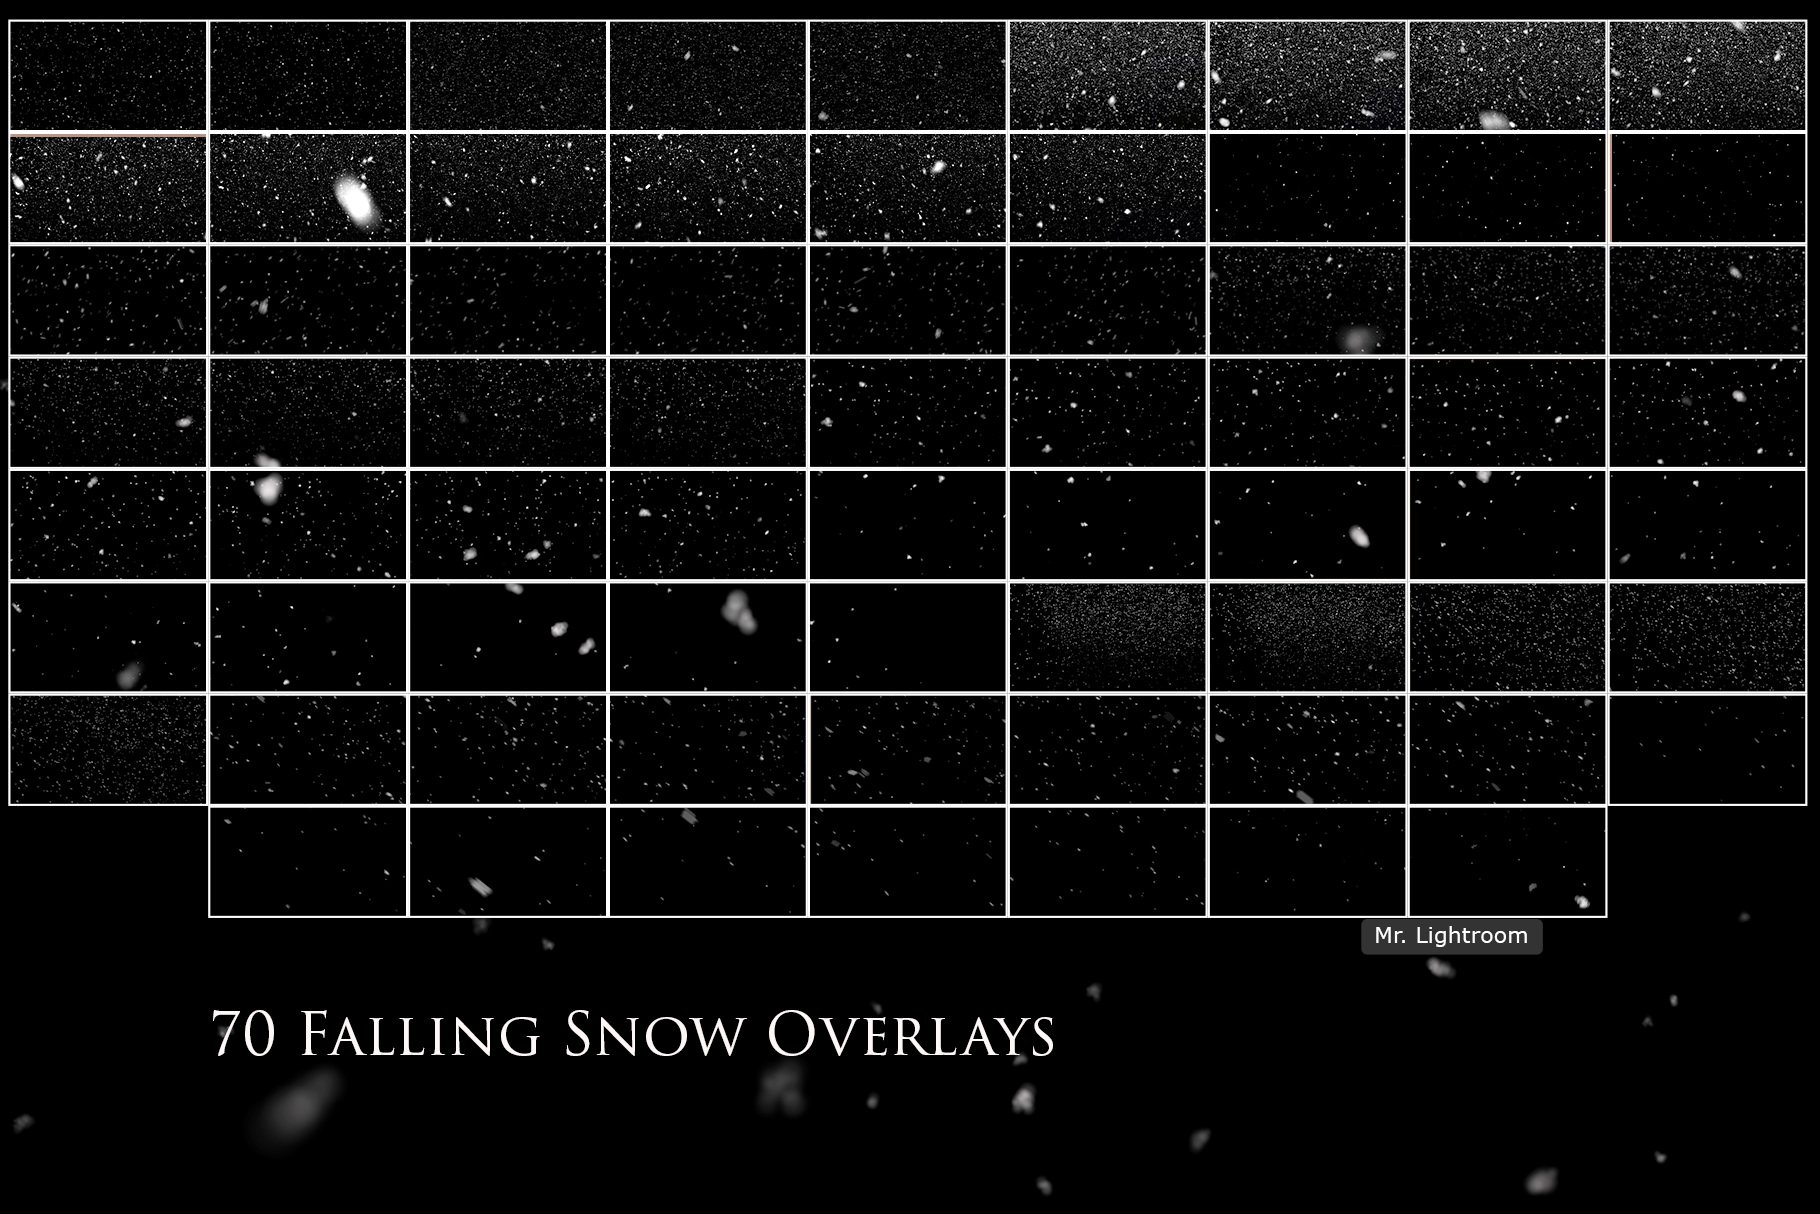 Falling Snow 70 Photo Overlayspreview image.